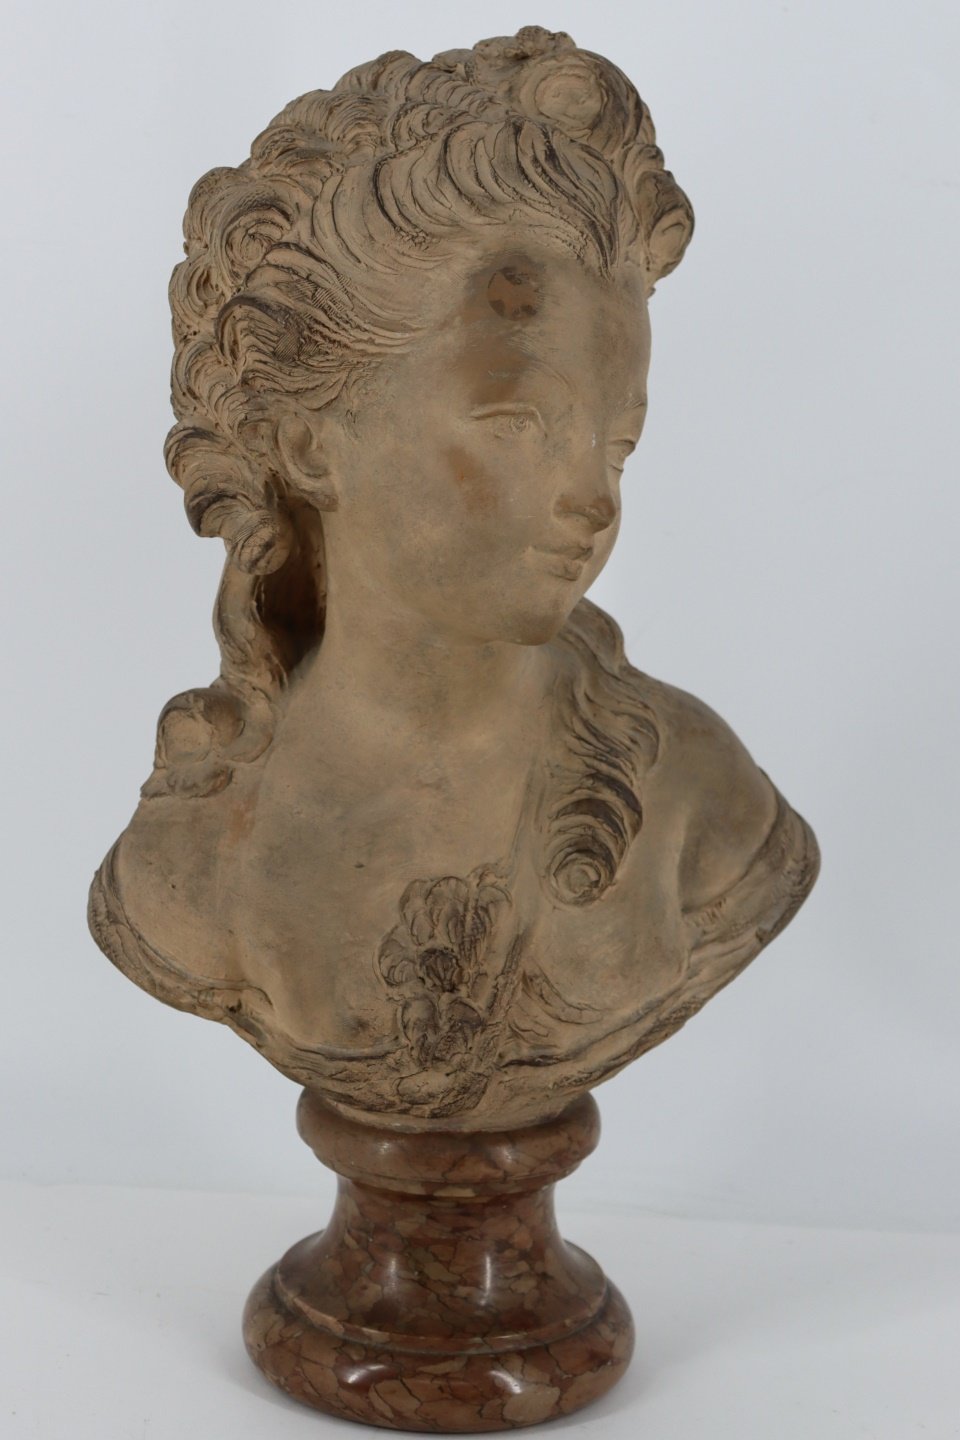 ANTIQUE FRENCH TERRACOTTA BUST 3b9652